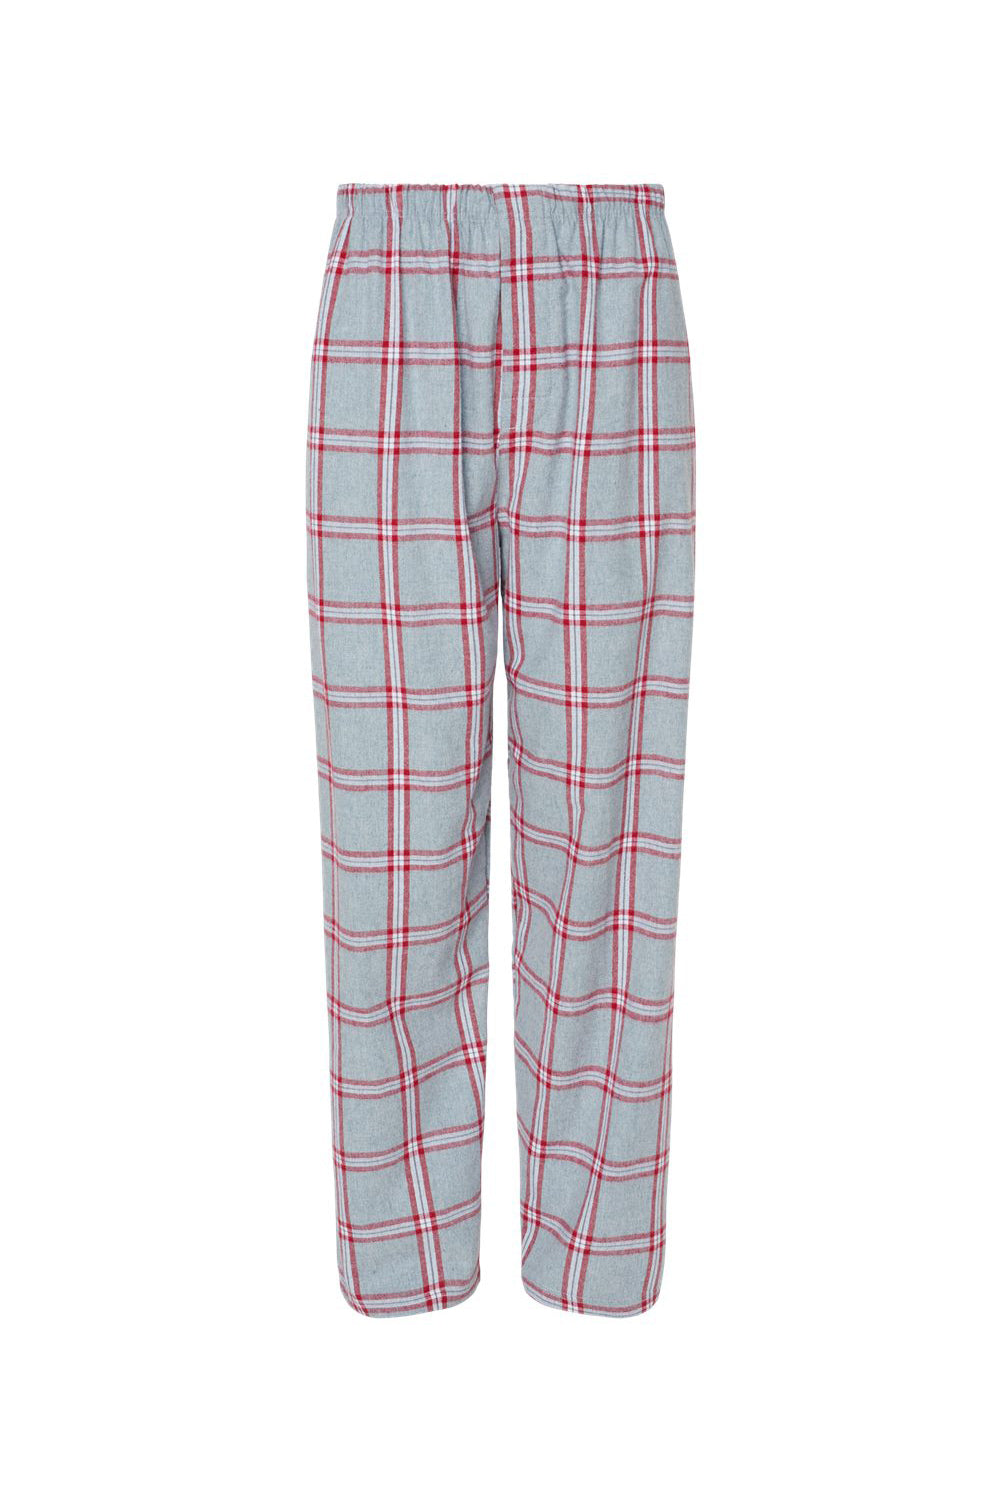 Boxercraft BM6624 Mens Harley Flannel Pants Oxford Red Tomboy Plaid Flat Front